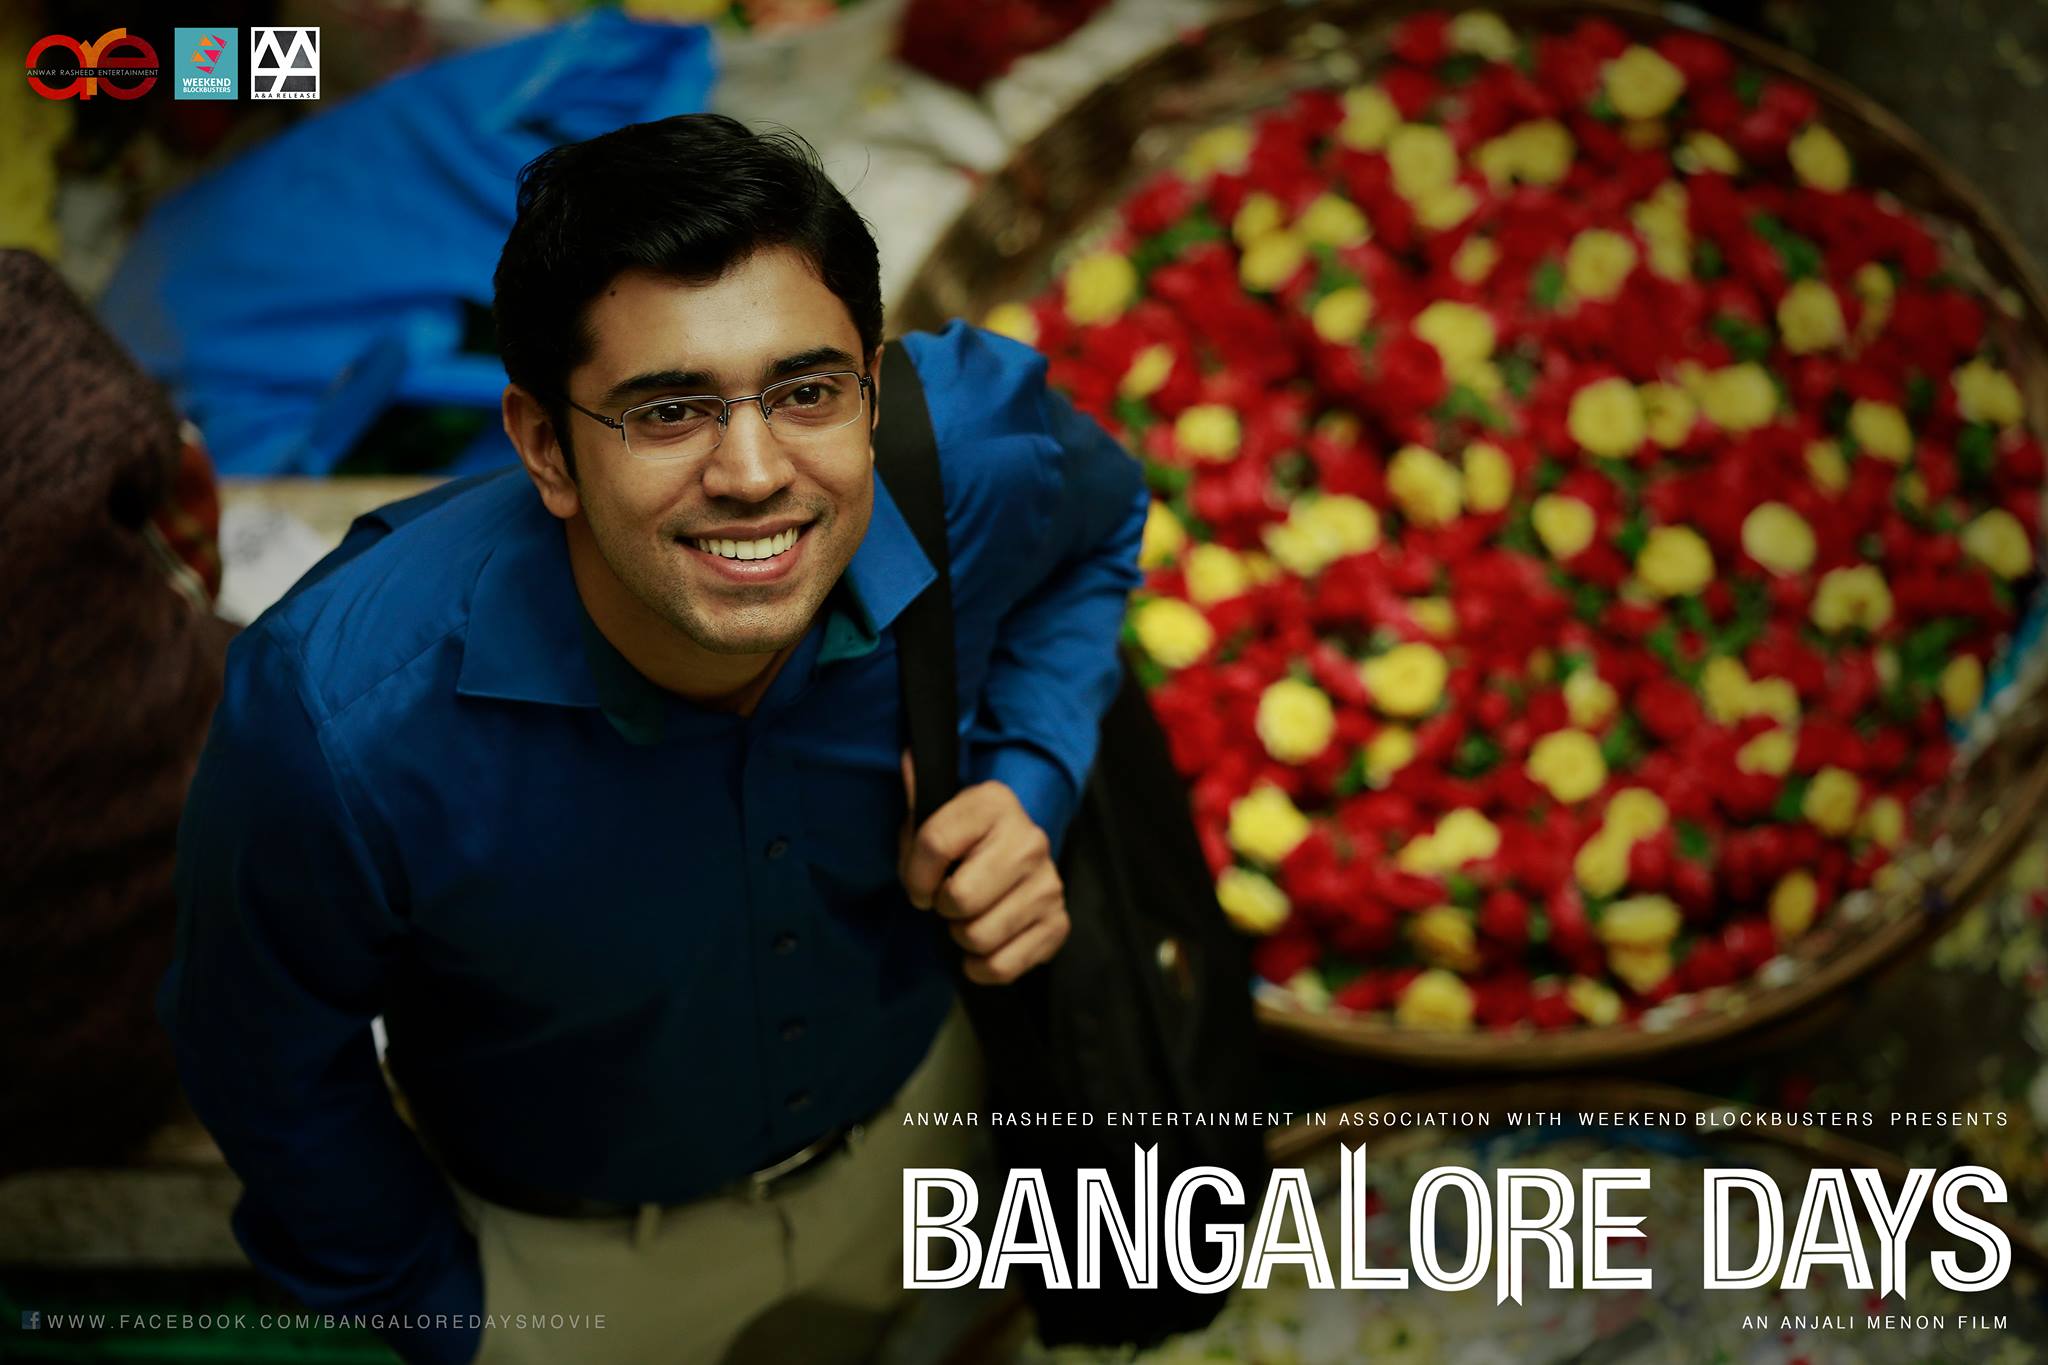 BANGALORE DAYS Trailers, Photo and Wallpaper